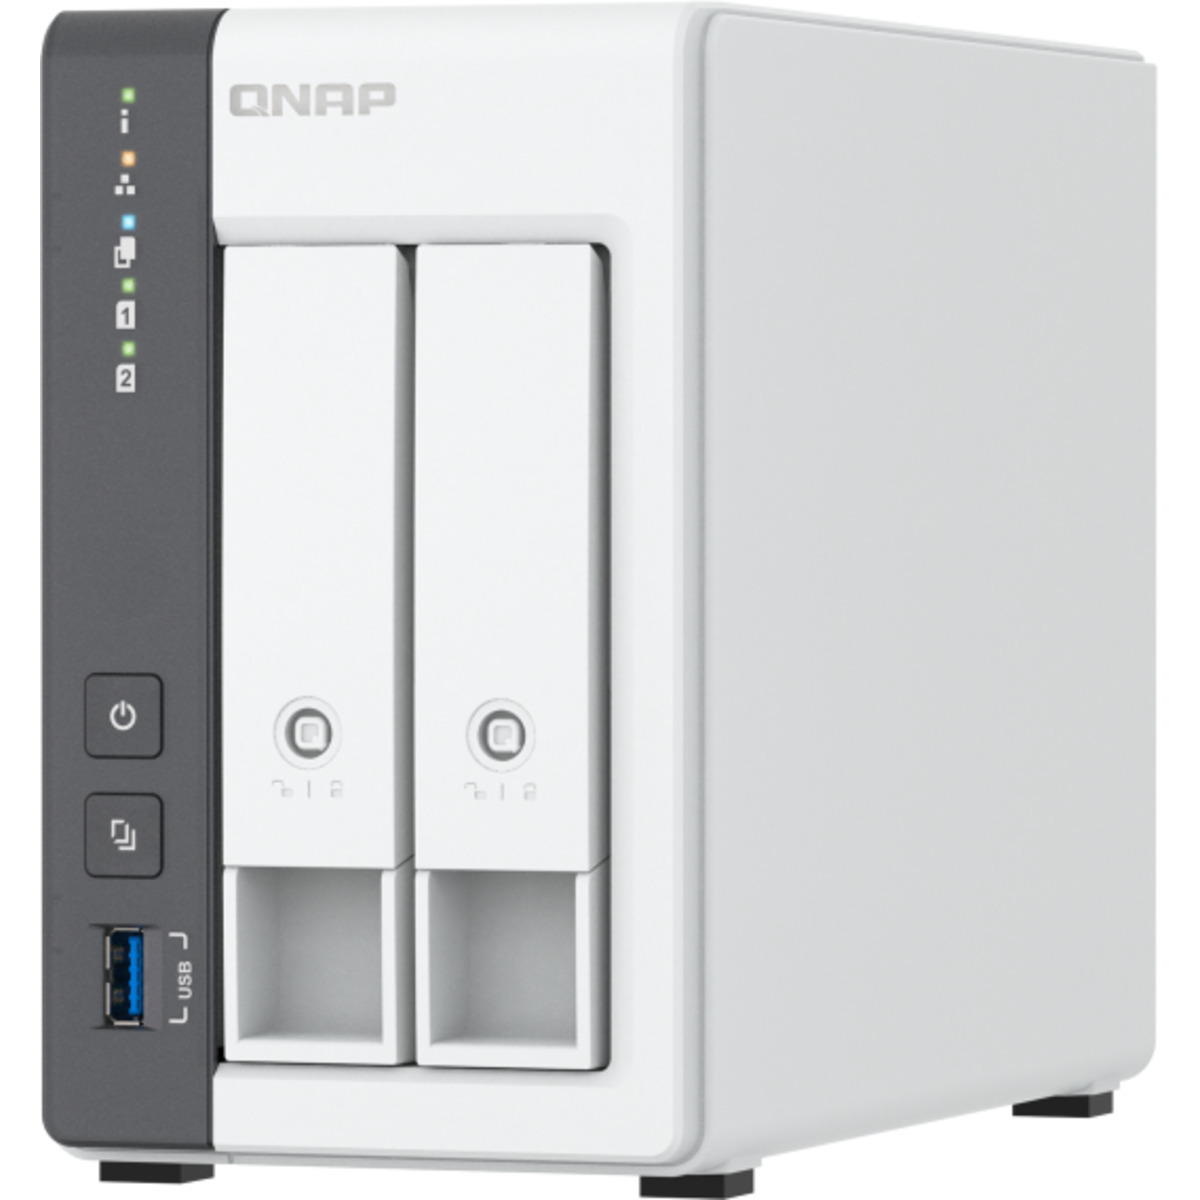 QNAP TS-216G 32tb 2-Bay Desktop Personal / Basic Home / Small Office NAS - Network Attached Storage Device 2x16tb Seagate IronWolf Pro ST16000NT001 3.5 7200rpm SATA 6Gb/s HDD NAS Class Drives Installed - Burn-In Tested - ON SALE TS-216G